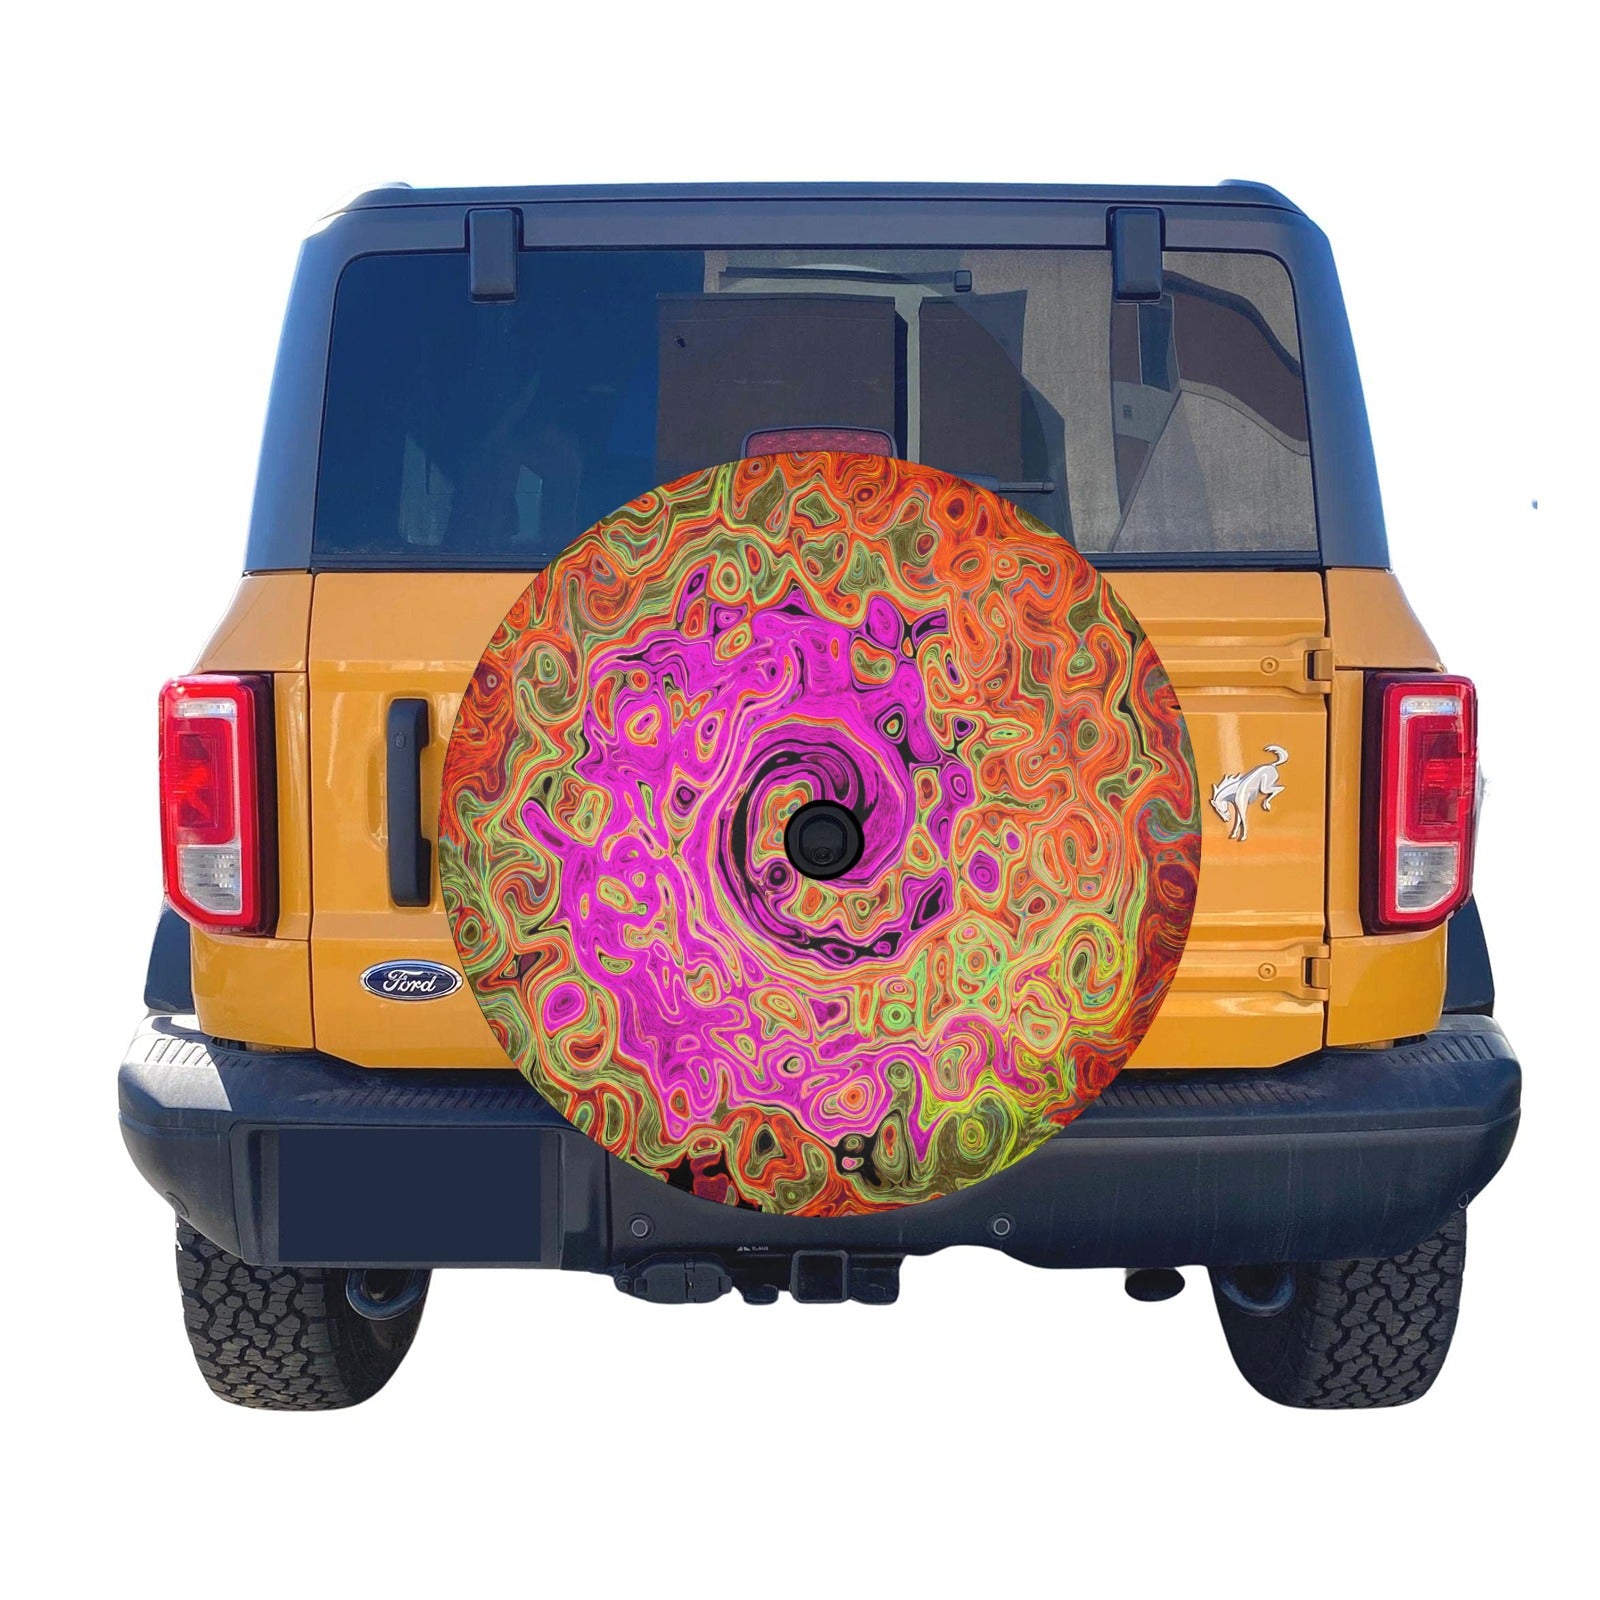 Spare Tire Cover With Backup Camera Hole - Hot Pink Groovy Abstract Retro Liquid Swirl - Small